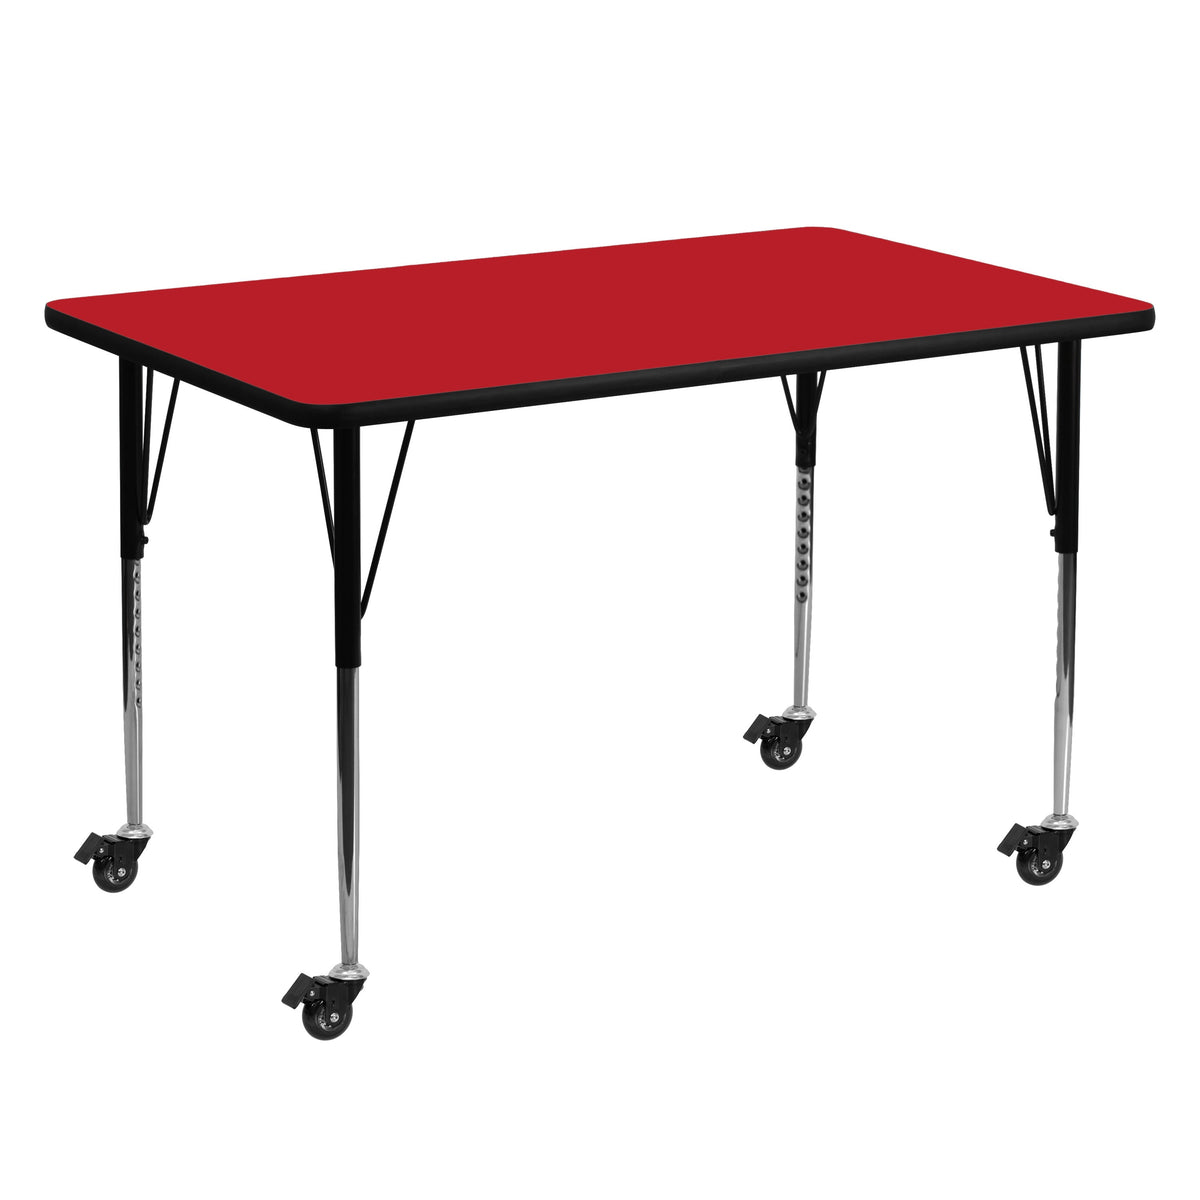 Red |#| Mobile 30inchW x 60inchL Rectangular Red HP Laminate Adjustable Activity Table